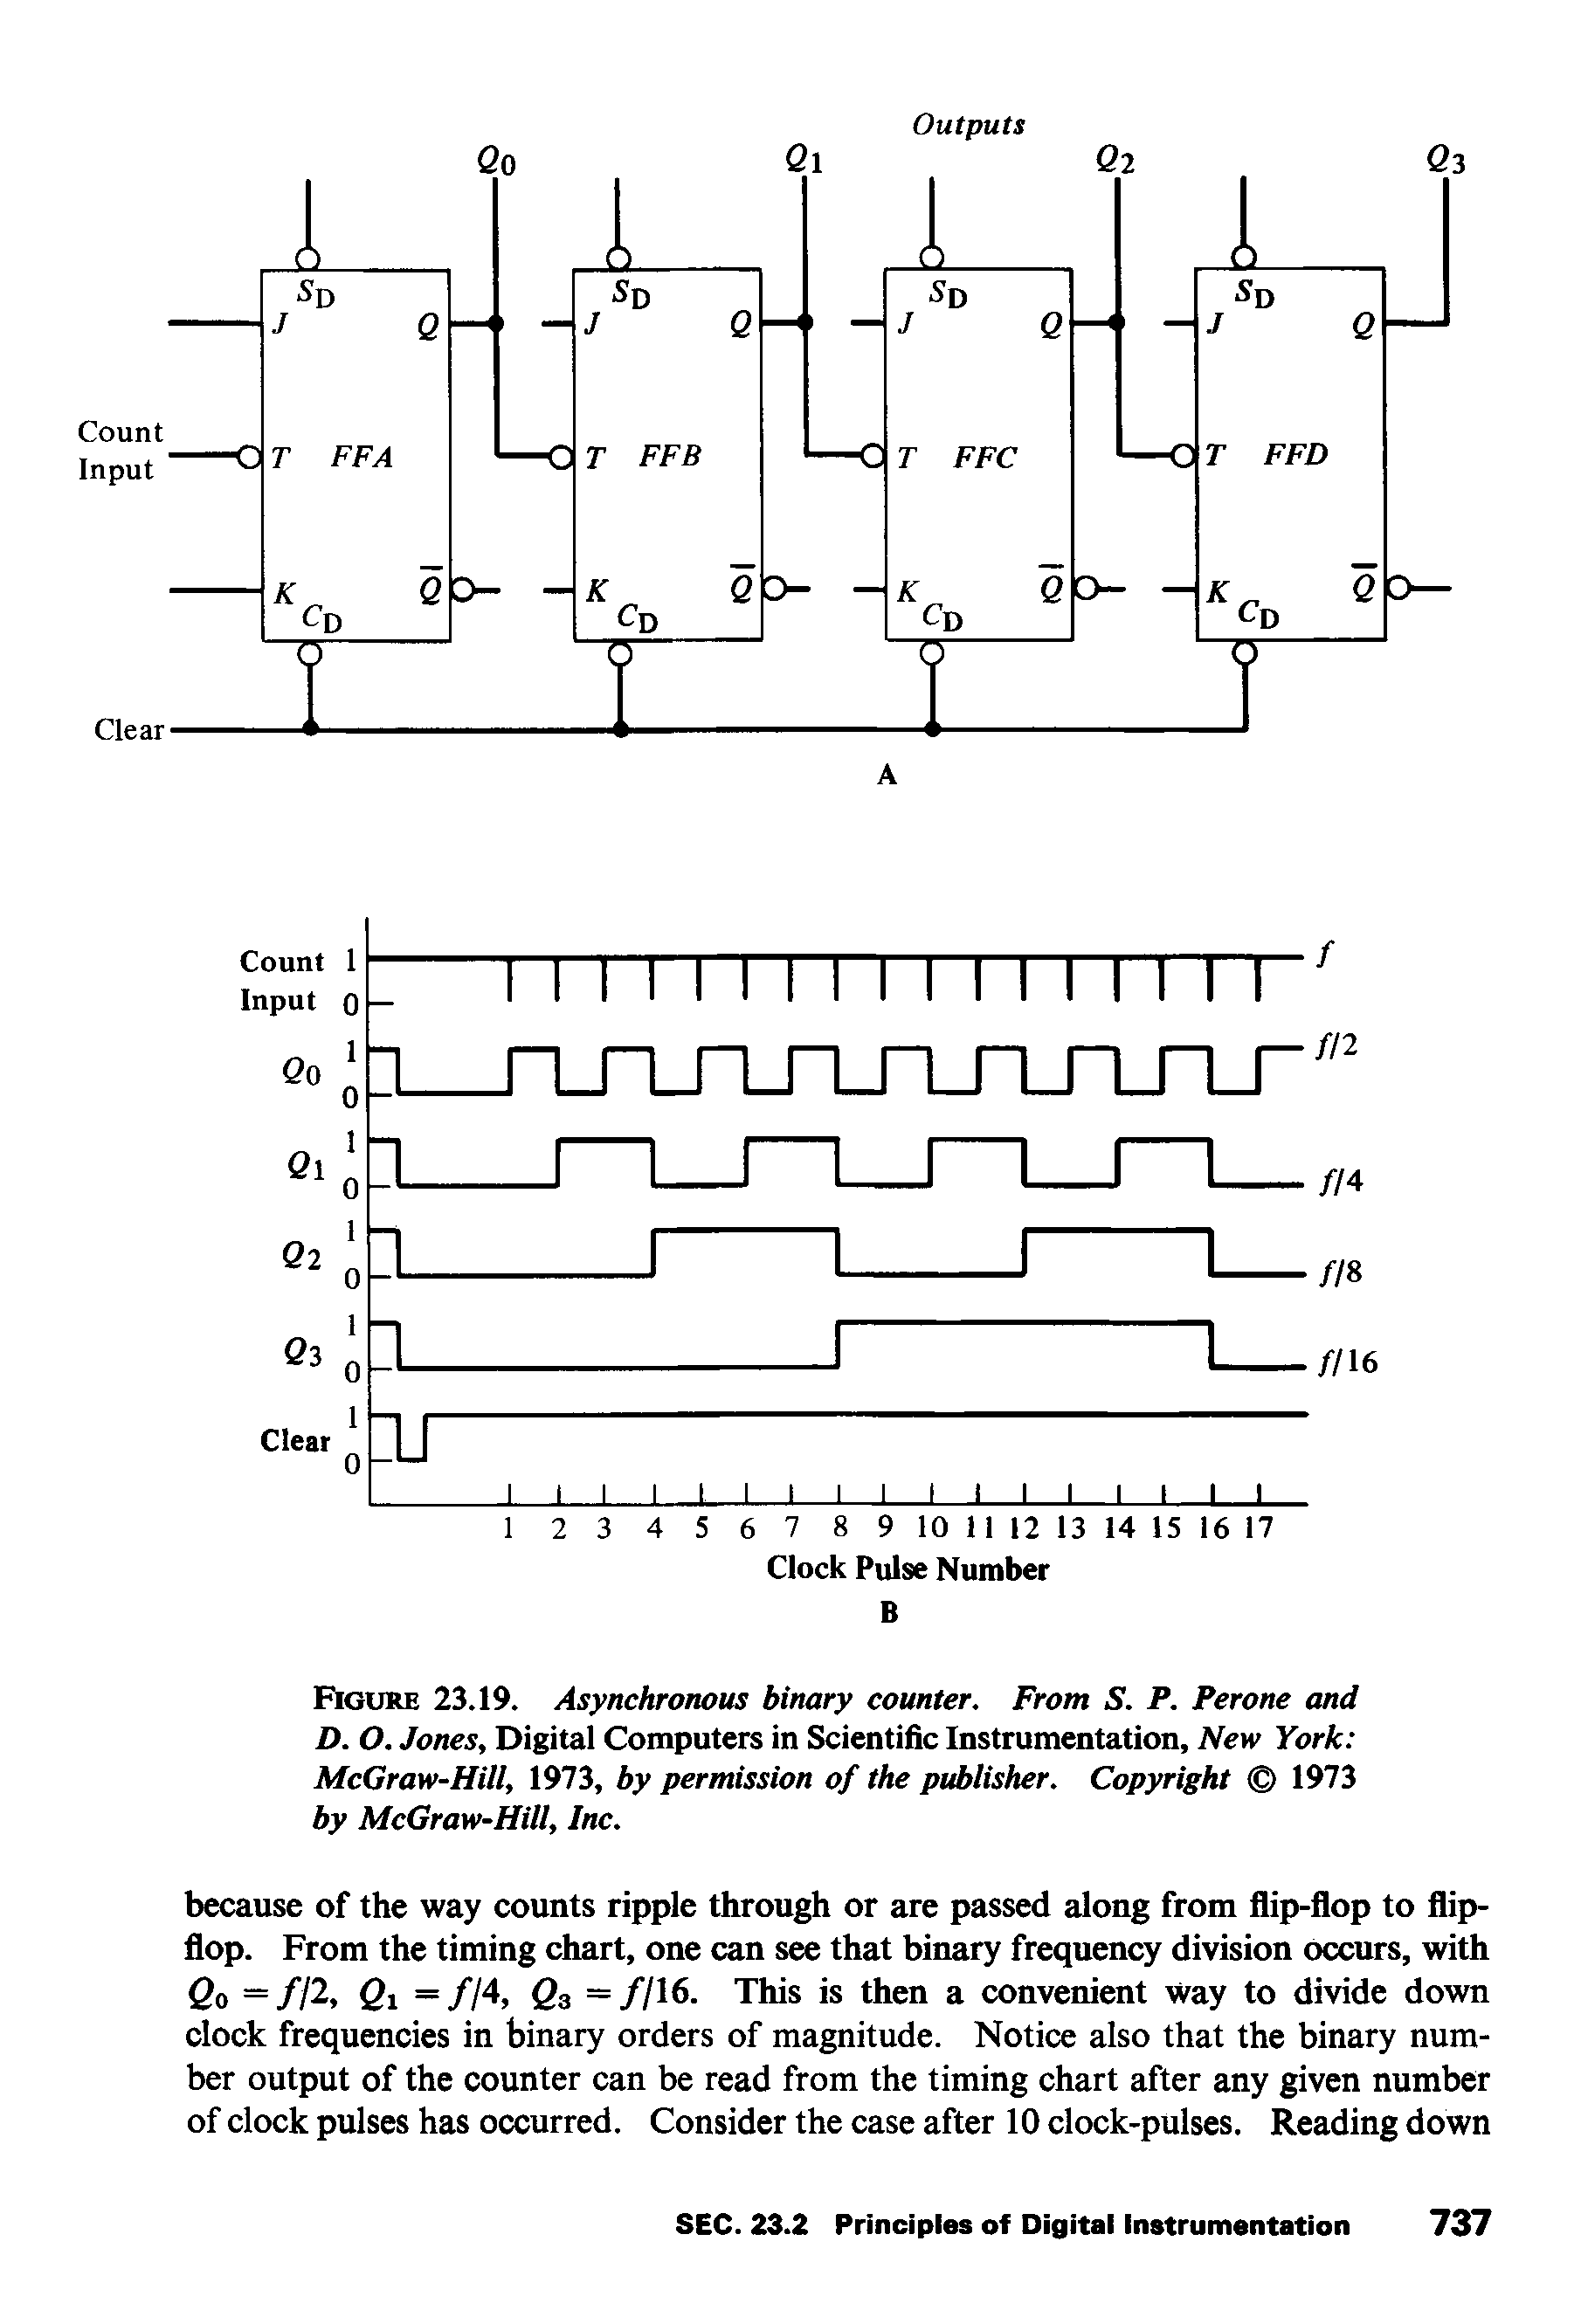 Figure 23.19. Asynchronous binary counter. From S. P. Perone and D. O. Jones, Digital Computers in Scientific Instrumentation, New York McGraw-Hill, 1973, by permission of the publisher. Copyright 1973 by McGraw-Hill, Inc.